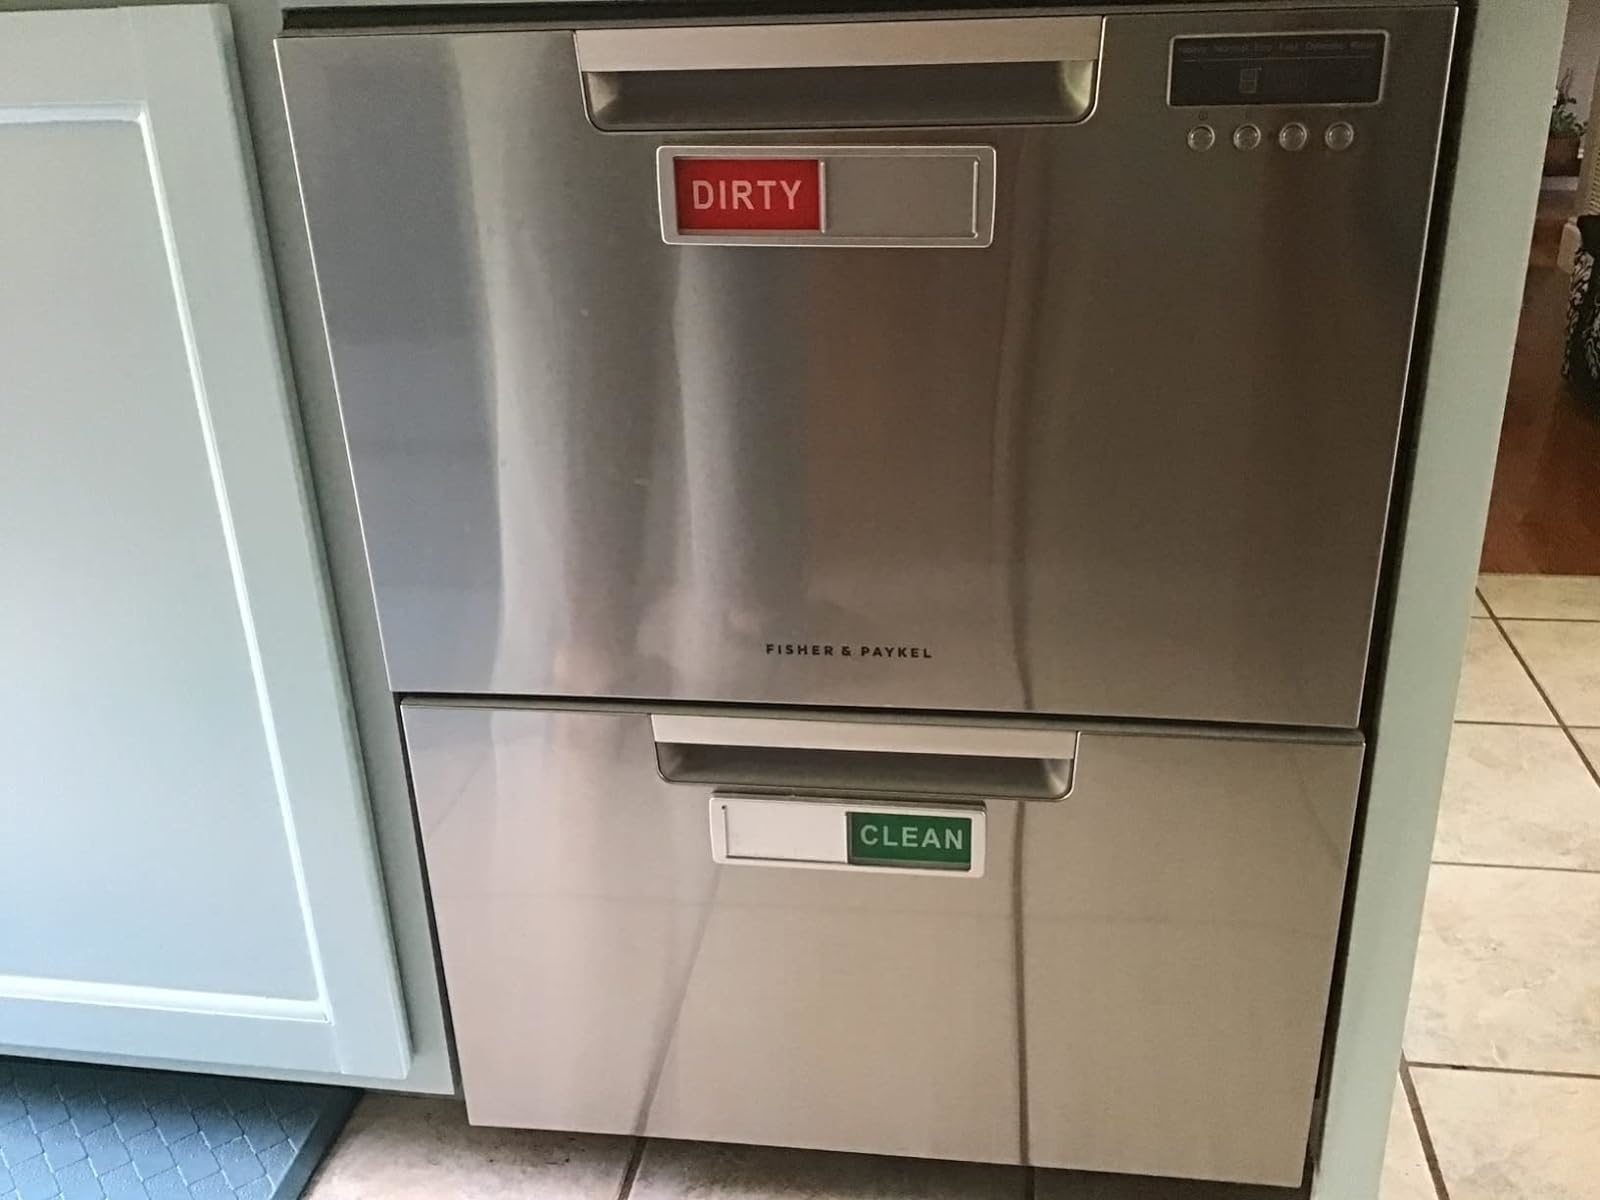 Reviewer’s photo of double dishwasher with red dirty magnet and green clean magnet